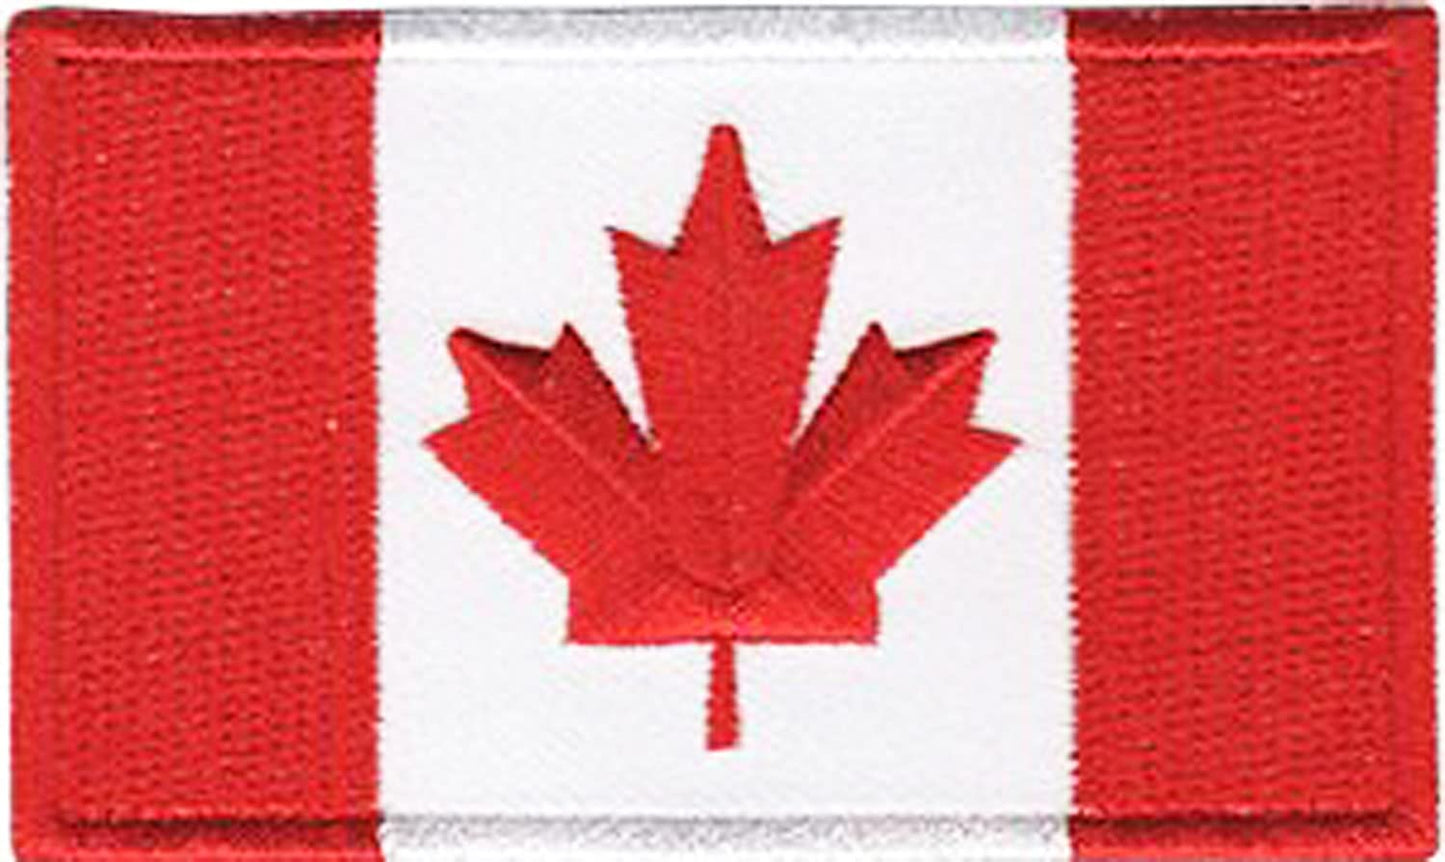 Flag Patches - Canadian and Provincial